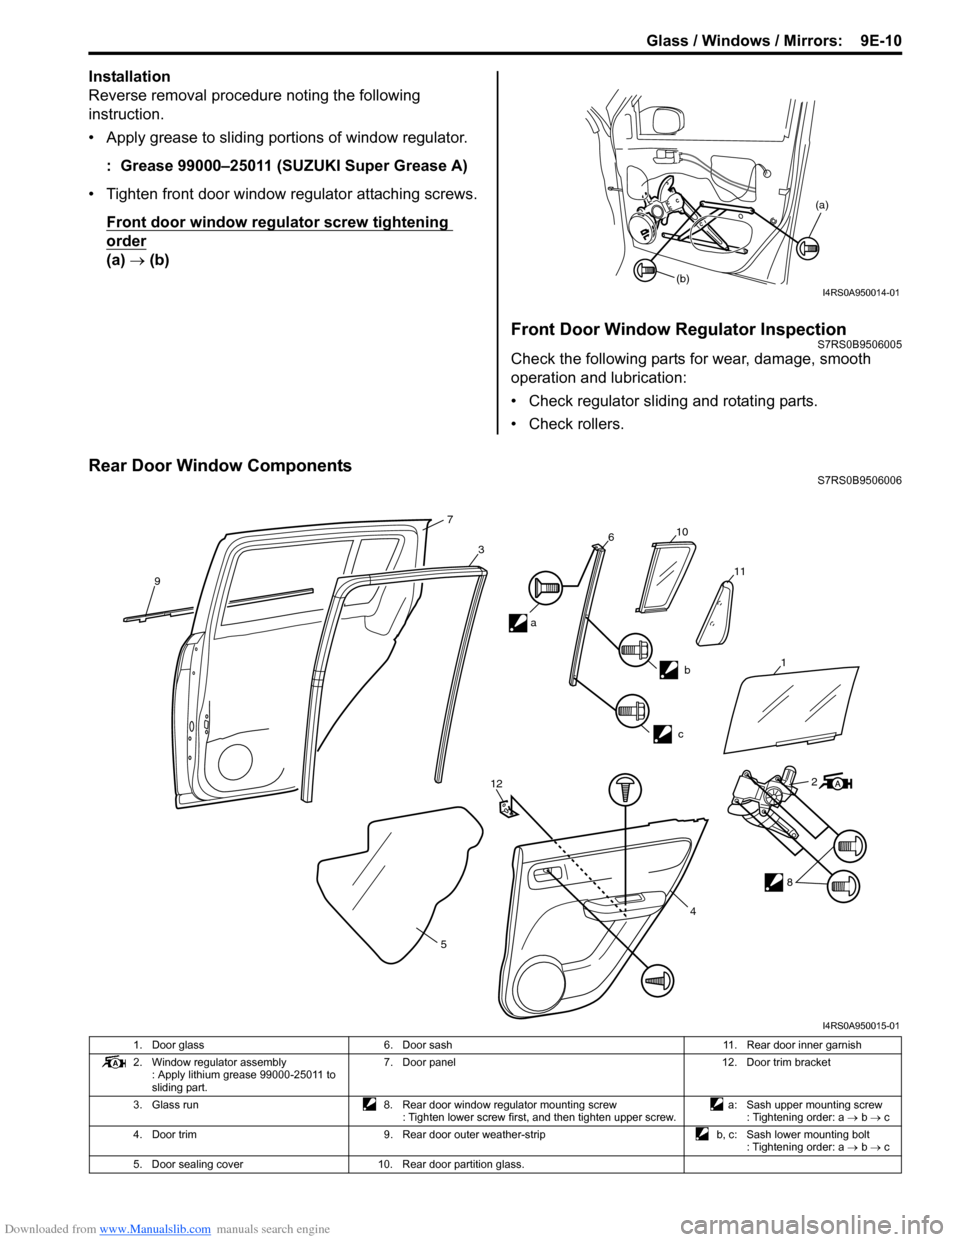 SUZUKI SWIFT 2008 2.G Service Workshop Manual Downloaded from www.Manualslib.com manuals search engine Glass / Windows / Mirrors:  9E-10
Installation
Reverse removal procedure noting the following 
instruction.
• Apply grease to sliding portion